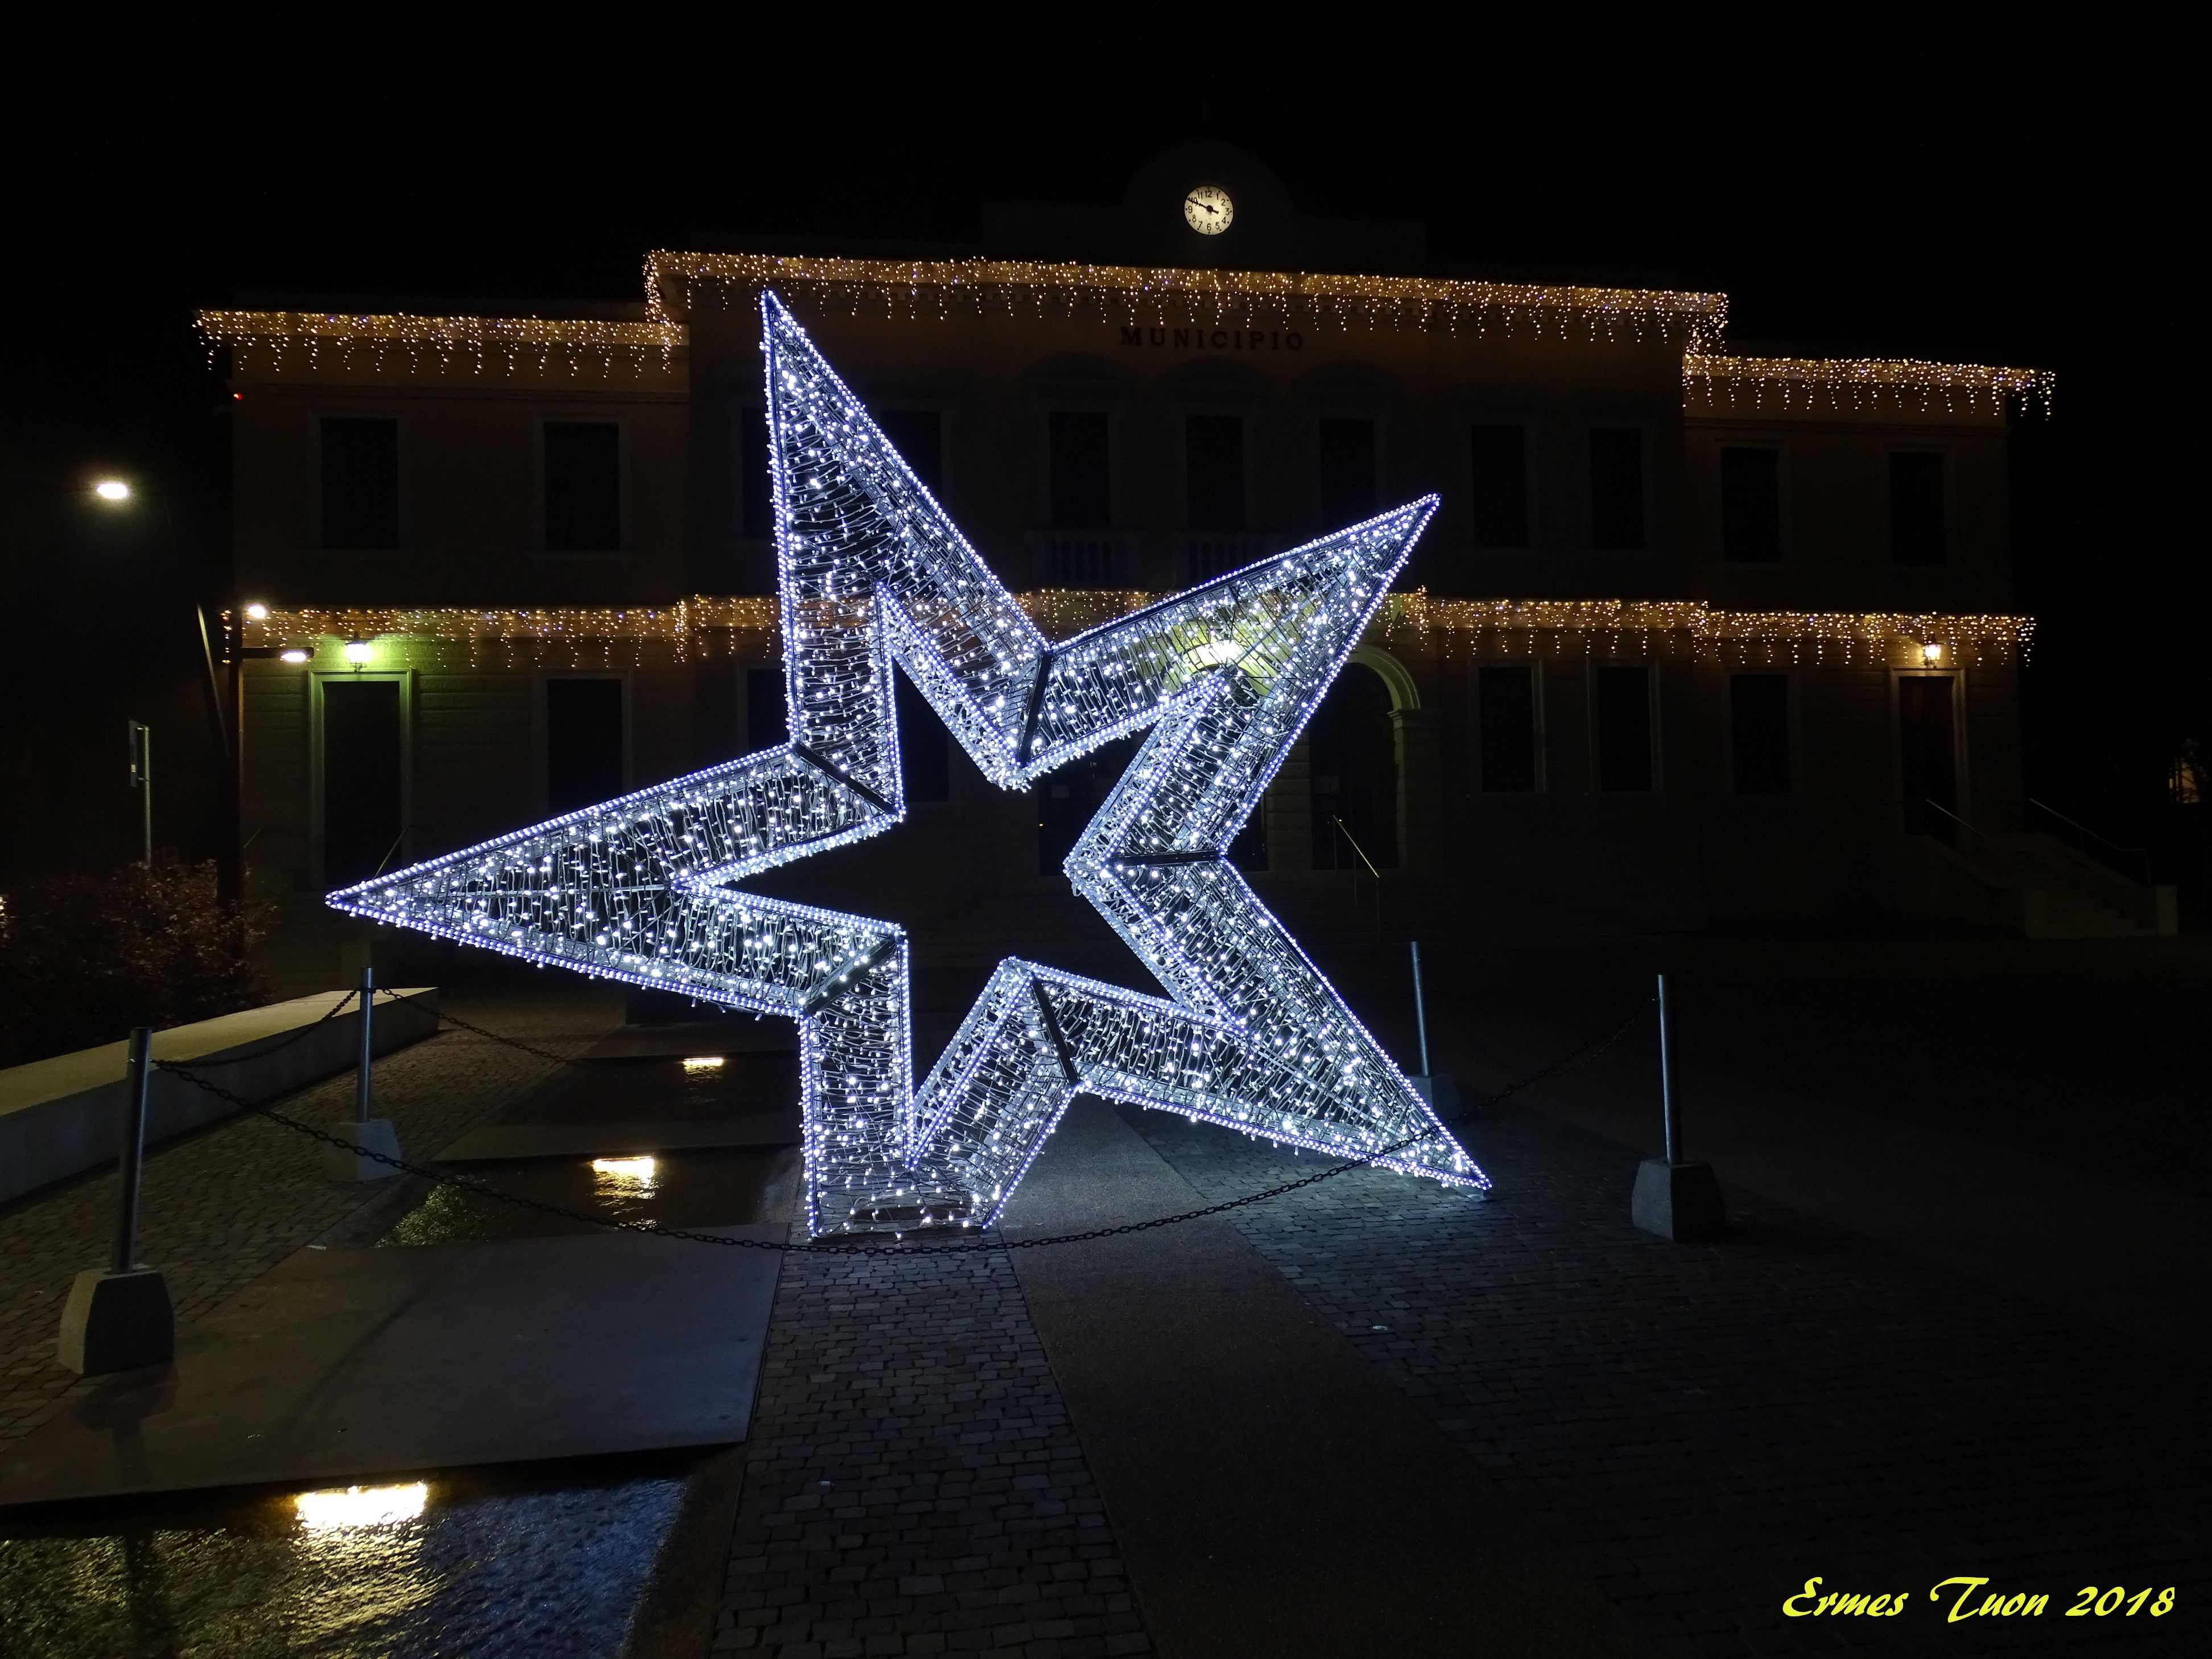 Caption: a star of lights in front of the City Hall - Local guide @ermest